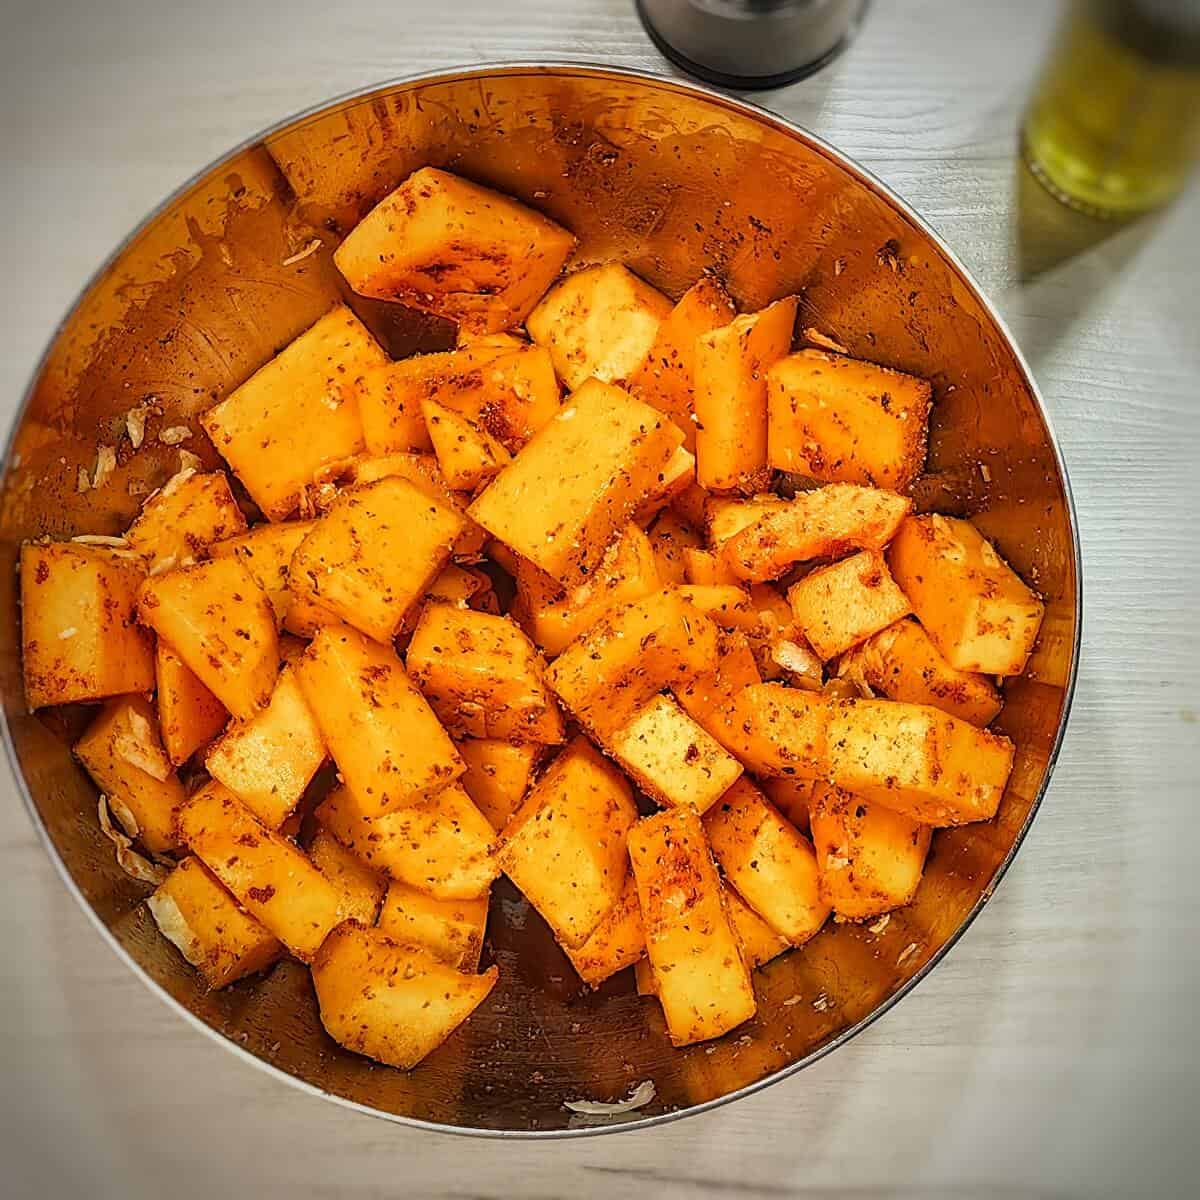 mix oil and seasonings and coat pumpkin slices